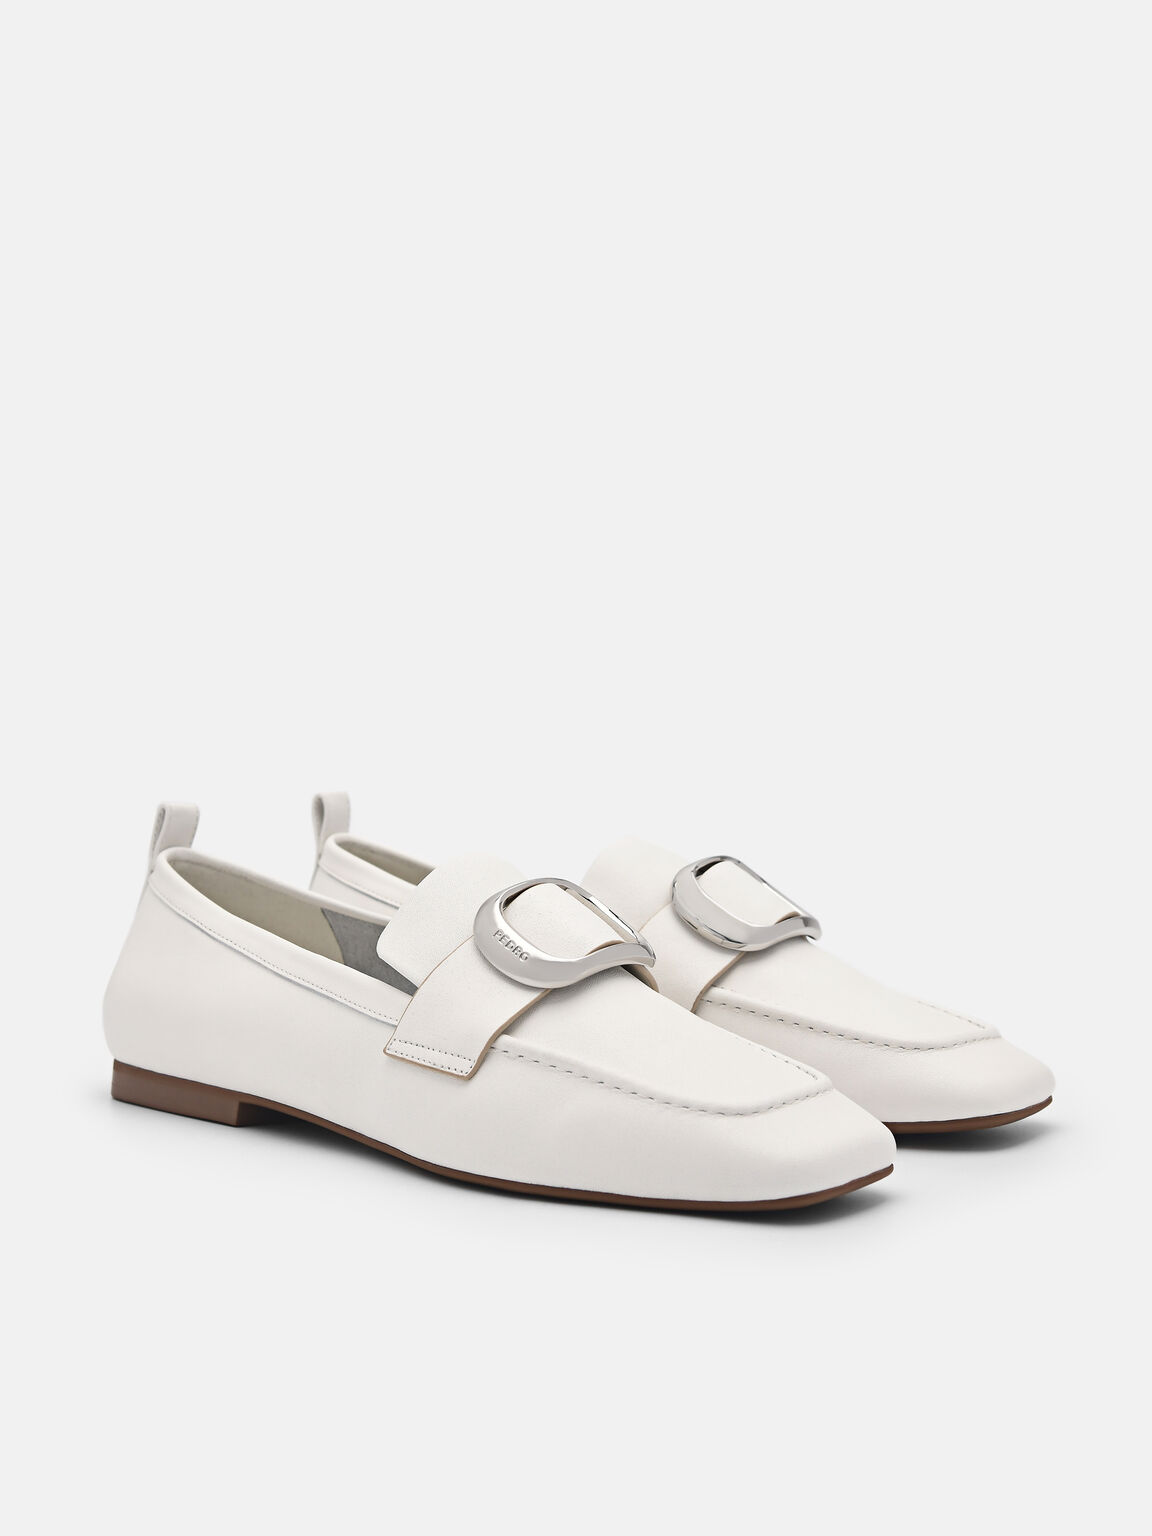 Eden Leather Loafers, White, hi-res